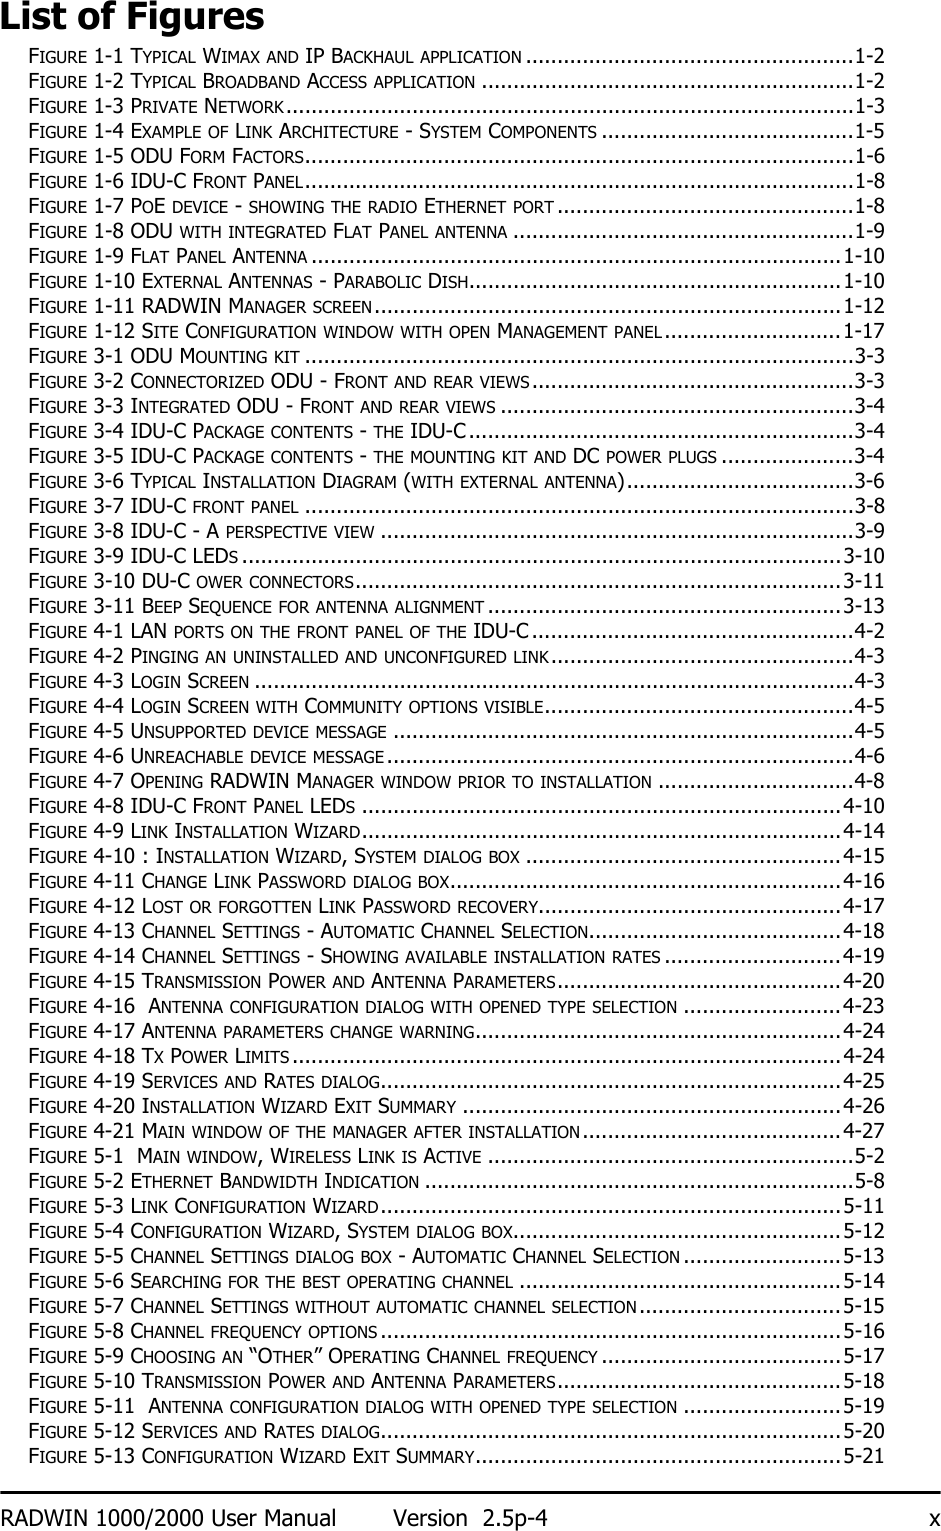 RADWIN 1000/2000 User Manual Version  2.5p-4 xList of FiguresFIGURE 1-1 TYPICAL WIMAX AND IP BACKHAUL APPLICATION ....................................................1-2FIGURE 1-2 TYPICAL BROADBAND ACCESS APPLICATION ...........................................................1-2FIGURE 1-3 PRIVATE NETWORK..........................................................................................1-3FIGURE 1-4 EXAMPLE OF LINK ARCHITECTURE - SYSTEM COMPONENTS ........................................1-5FIGURE 1-5 ODU FORM FACTORS.......................................................................................1-6FIGURE 1-6 IDU-C FRONT PANEL.......................................................................................1-8FIGURE 1-7 POE DEVICE - SHOWING THE RADIO ETHERNET PORT ...............................................1-8FIGURE 1-8 ODU WITH INTEGRATED FLAT PANEL ANTENNA ......................................................1-9FIGURE 1-9 FLAT PANEL ANTENNA ....................................................................................1-10FIGURE 1-10 EXTERNAL ANTENNAS - PARABOLIC DISH...........................................................1-10FIGURE 1-11 RADWIN MANAGER SCREEN..........................................................................1-12FIGURE 1-12 SITE CONFIGURATION WINDOW WITH OPEN MANAGEMENT PANEL............................1-17FIGURE 3-1 ODU MOUNTING KIT .......................................................................................3-3FIGURE 3-2 CONNECTORIZED ODU - FRONT AND REAR VIEWS...................................................3-3FIGURE 3-3 INTEGRATED ODU - FRONT AND REAR VIEWS ........................................................3-4FIGURE 3-4 IDU-C PACKAGE CONTENTS - THE IDU-C .............................................................3-4FIGURE 3-5 IDU-C PACKAGE CONTENTS - THE MOUNTING KIT AND DC POWER PLUGS .....................3-4FIGURE 3-6 TYPICAL INSTALLATION DIAGRAM (WITH EXTERNAL ANTENNA)....................................3-6FIGURE 3-7 IDU-C FRONT PANEL .......................................................................................3-8FIGURE 3-8 IDU-C - A PERSPECTIVE VIEW ...........................................................................3-9FIGURE 3-9 IDU-C LEDS...............................................................................................3-10FIGURE 3-10 DU-C OWER CONNECTORS.............................................................................3-11FIGURE 3-11 BEEP SEQUENCE FOR ANTENNA ALIGNMENT ........................................................3-13FIGURE 4-1 LAN PORTS ON THE FRONT PANEL OF THE IDU-C ...................................................4-2FIGURE 4-2 PINGING AN UNINSTALLED AND UNCONFIGURED LINK................................................4-3FIGURE 4-3 LOGIN SCREEN ...............................................................................................4-3FIGURE 4-4 LOGIN SCREEN WITH COMMUNITY OPTIONS VISIBLE.................................................4-5FIGURE 4-5 UNSUPPORTED DEVICE MESSAGE .........................................................................4-5FIGURE 4-6 UNREACHABLE DEVICE MESSAGE ..........................................................................4-6FIGURE 4-7 OPENING RADWIN MANAGER WINDOW PRIOR TO INSTALLATION ...............................4-8FIGURE 4-8 IDU-C FRONT PANEL LEDS............................................................................4-10FIGURE 4-9 LINK INSTALLATION WIZARD............................................................................4-14FIGURE 4-10 : INSTALLATION WIZARD, SYSTEM DIALOG BOX ..................................................4-15FIGURE 4-11 CHANGE LINK PASSWORD DIALOG BOX..............................................................4-16FIGURE 4-12 LOST OR FORGOTTEN LINK PASSWORD RECOVERY................................................4-17FIGURE 4-13 CHANNEL SETTINGS - AUTOMATIC CHANNEL SELECTION........................................4-18FIGURE 4-14 CHANNEL SETTINGS - SHOWING AVAILABLE INSTALLATION RATES ............................4-19FIGURE 4-15 TRANSMISSION POWER AND ANTENNA PARAMETERS.............................................4-20FIGURE 4-16  ANTENNA CONFIGURATION DIALOG WITH OPENED TYPE SELECTION .........................4-23FIGURE 4-17 ANTENNA PARAMETERS CHANGE WARNING..........................................................4-24FIGURE 4-18 TX POWER LIMITS .......................................................................................4-24FIGURE 4-19 SERVICES AND RATES DIALOG.........................................................................4-25FIGURE 4-20 INSTALLATION WIZARD EXIT SUMMARY ............................................................4-26FIGURE 4-21 MAIN WINDOW OF THE MANAGER AFTER INSTALLATION.........................................4-27FIGURE 5-1  MAIN WINDOW, WIRELESS LINK IS ACTIVE ..........................................................5-2FIGURE 5-2 ETHERNET BANDWIDTH INDICATION ....................................................................5-8FIGURE 5-3 LINK CONFIGURATION WIZARD.........................................................................5-11FIGURE 5-4 CONFIGURATION WIZARD, SYSTEM DIALOG BOX....................................................5-12FIGURE 5-5 CHANNEL SETTINGS DIALOG BOX - AUTOMATIC CHANNEL SELECTION .........................5-13FIGURE 5-6 SEARCHING FOR THE BEST OPERATING CHANNEL ...................................................5-14FIGURE 5-7 CHANNEL SETTINGS WITHOUT AUTOMATIC CHANNEL SELECTION................................5-15FIGURE 5-8 CHANNEL FREQUENCY OPTIONS .........................................................................5-16FIGURE 5-9 CHOOSING AN “OTHER” OPERATING CHANNEL FREQUENCY ......................................5-17FIGURE 5-10 TRANSMISSION POWER AND ANTENNA PARAMETERS.............................................5-18FIGURE 5-11  ANTENNA CONFIGURATION DIALOG WITH OPENED TYPE SELECTION .........................5-19FIGURE 5-12 SERVICES AND RATES DIALOG.........................................................................5-20FIGURE 5-13 CONFIGURATION WIZARD EXIT SUMMARY..........................................................5-21